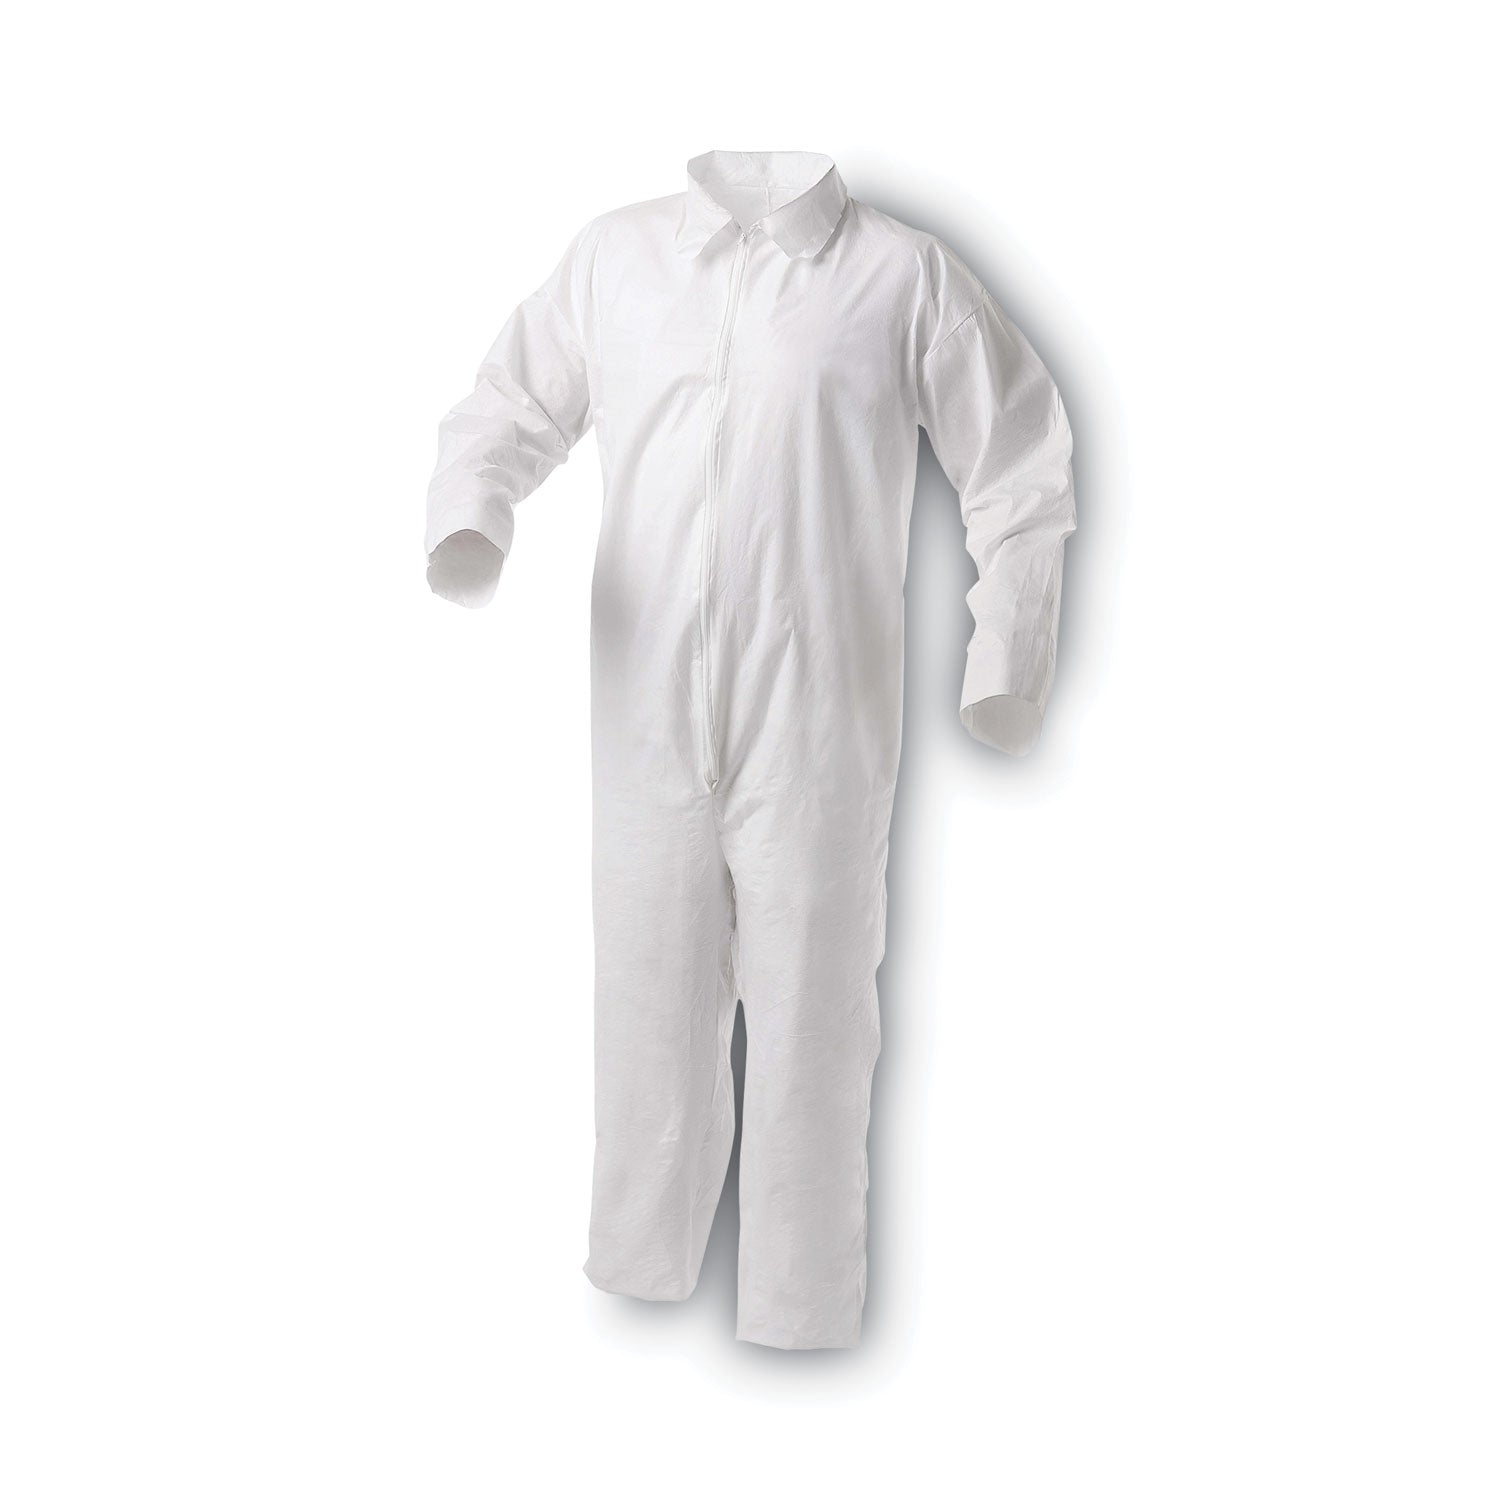 a35-liquid-and-particle-protection-coveralls-zipper-front-x-large-white-25-carton_kcc38919 - 1